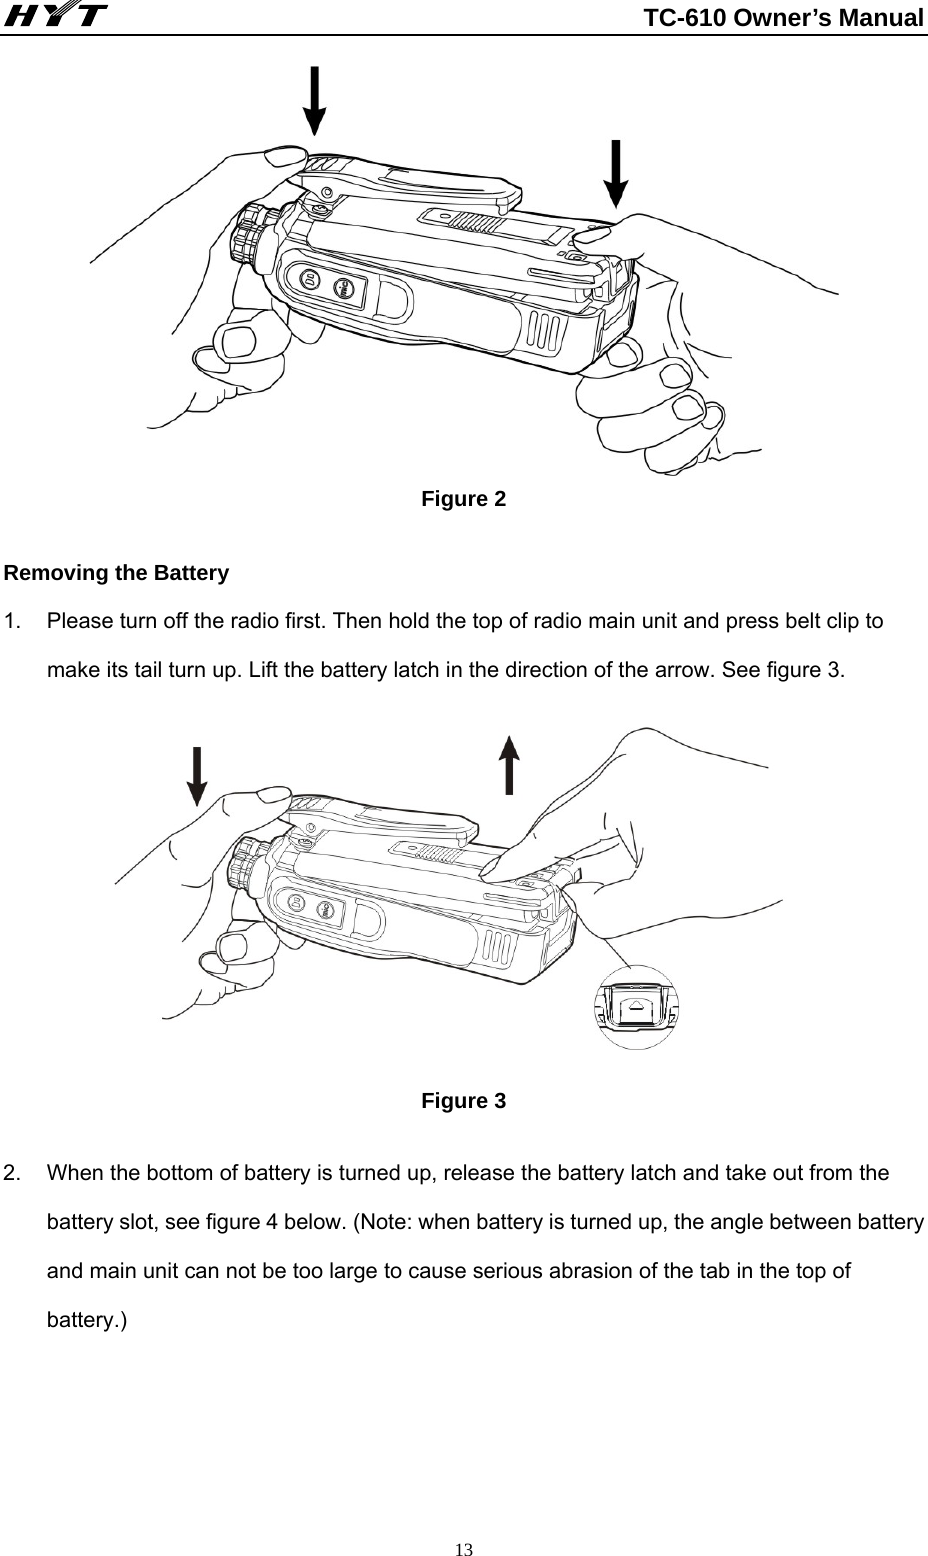                                                          TC-610 Owner’s Manual  13 Figure 2   Removing the Battery 1.  Please turn off the radio first. Then hold the top of radio main unit and press belt clip to make its tail turn up. Lift the battery latch in the direction of the arrow. See figure 3.      Figure 3  2.  When the bottom of battery is turned up, release the battery latch and take out from the battery slot, see figure 4 below. (Note: when battery is turned up, the angle between battery and main unit can not be too large to cause serious abrasion of the tab in the top of battery.)   